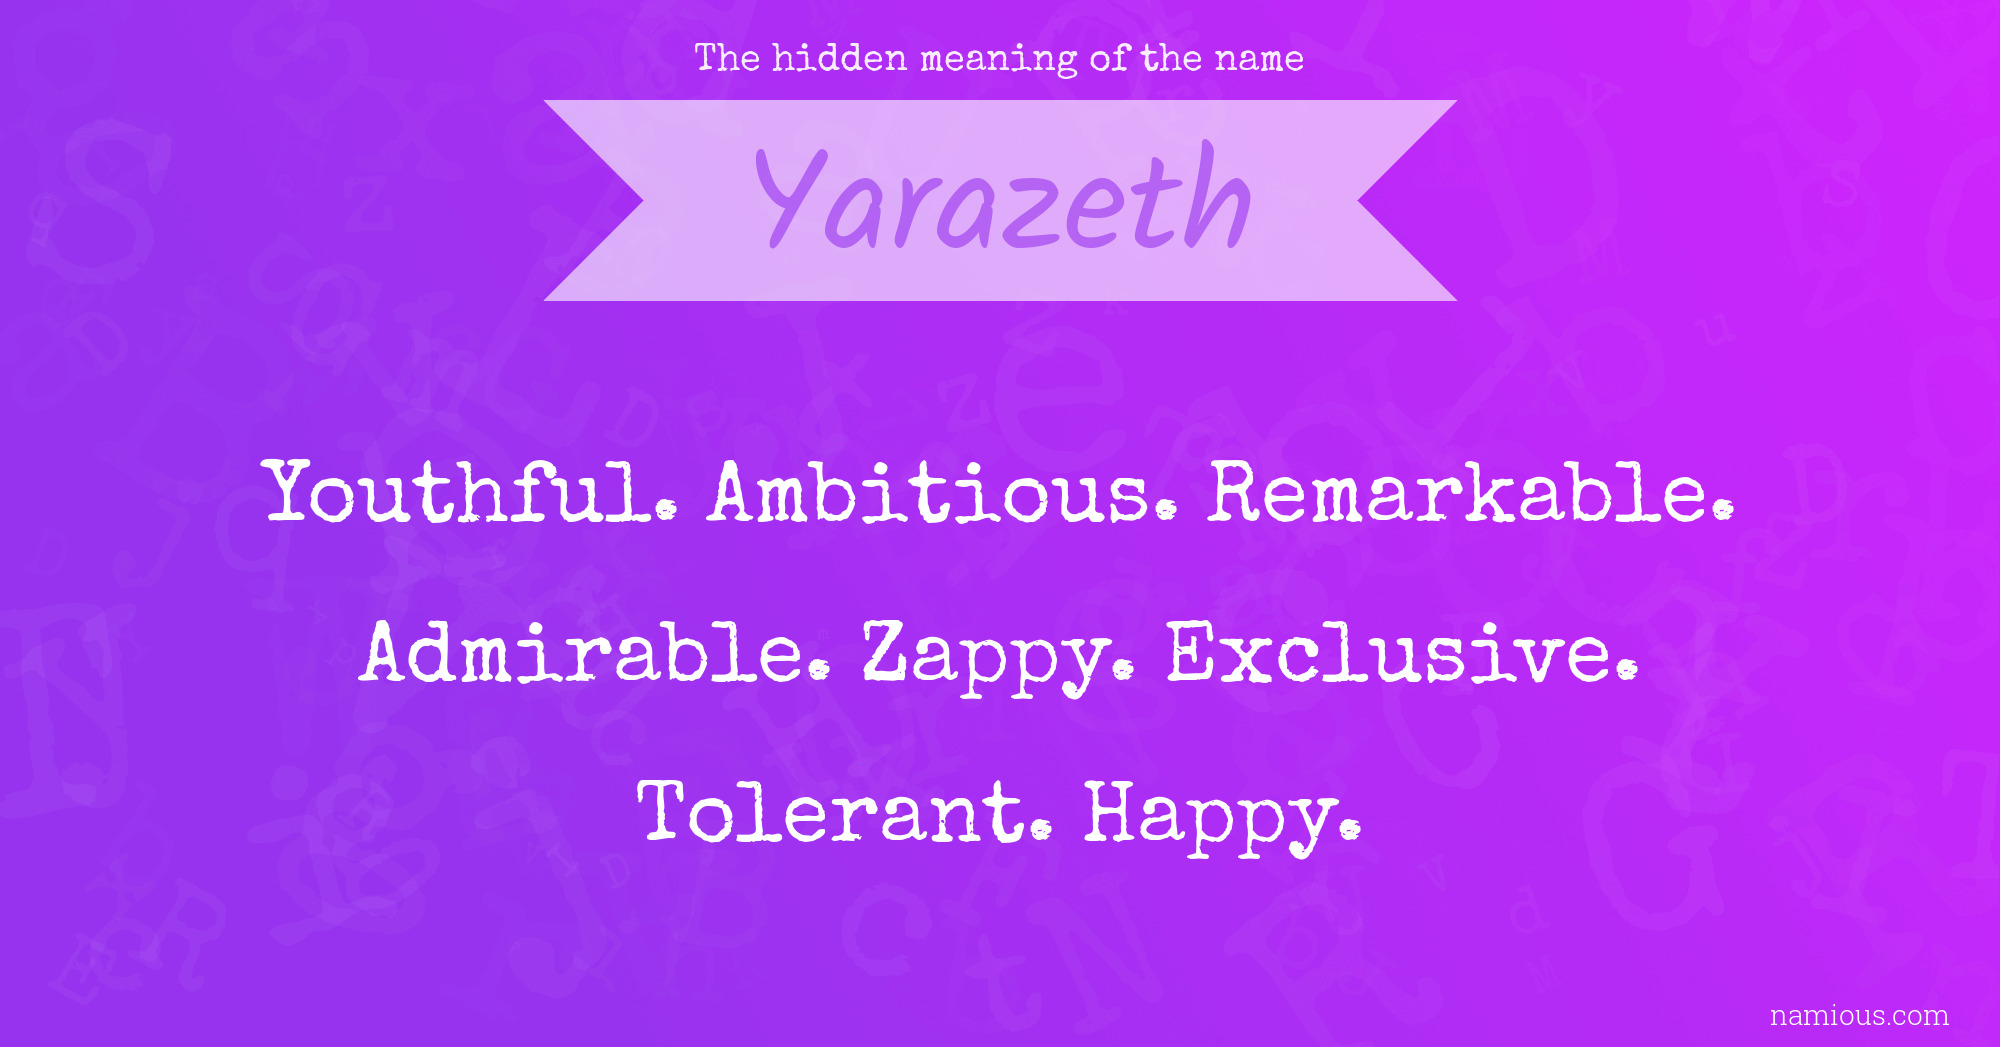 The hidden meaning of the name Yarazeth